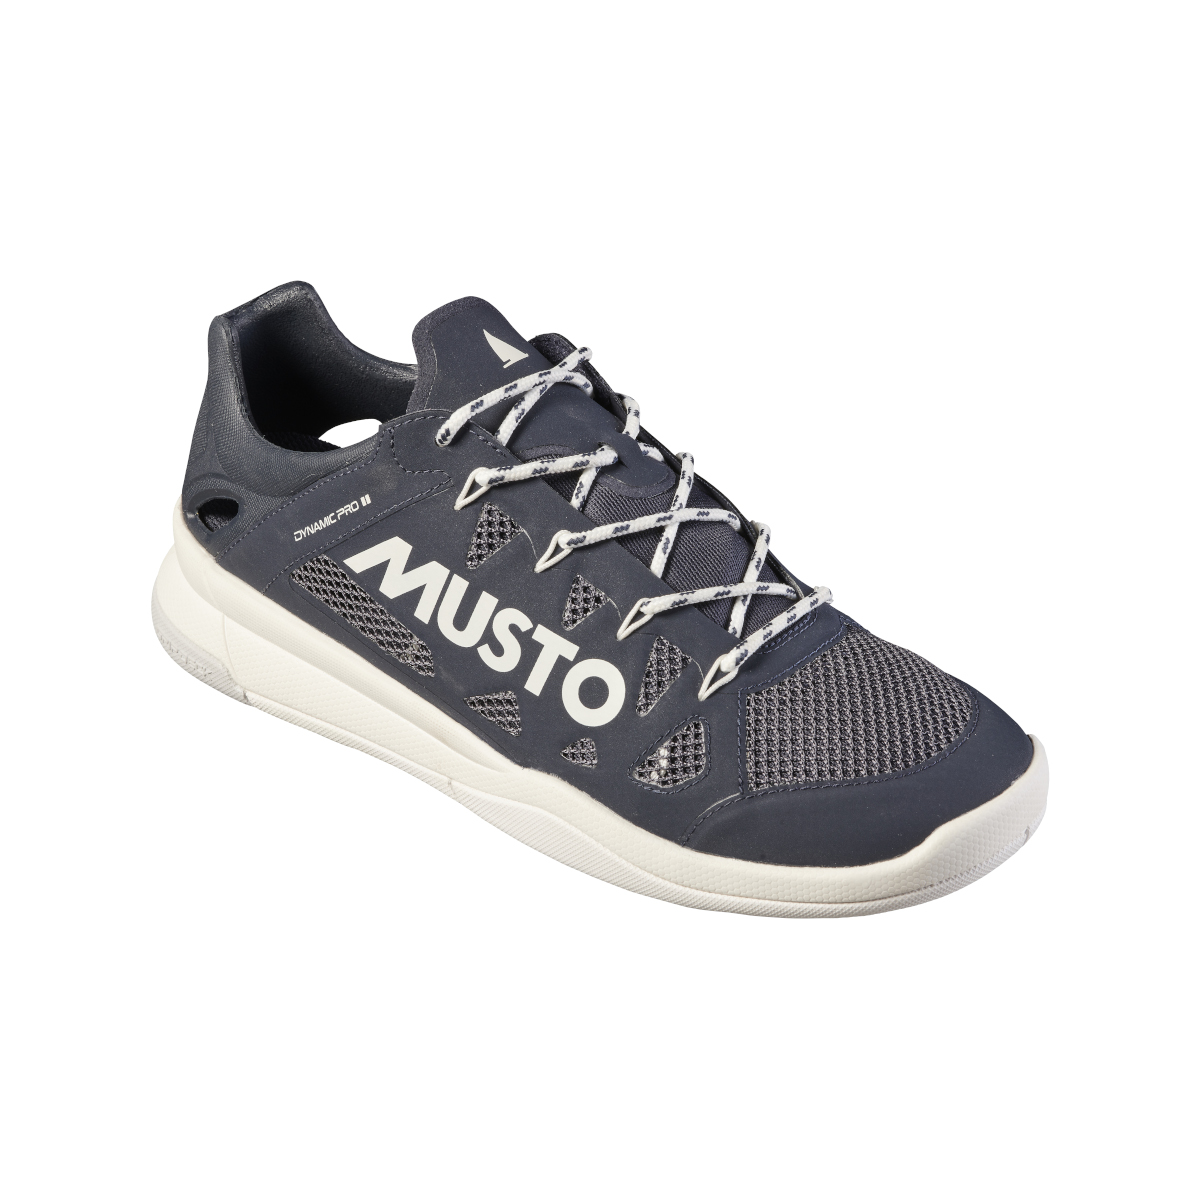 Musto Dynamic Pro II chaussures de voile homme bleu marine, taille 46,5